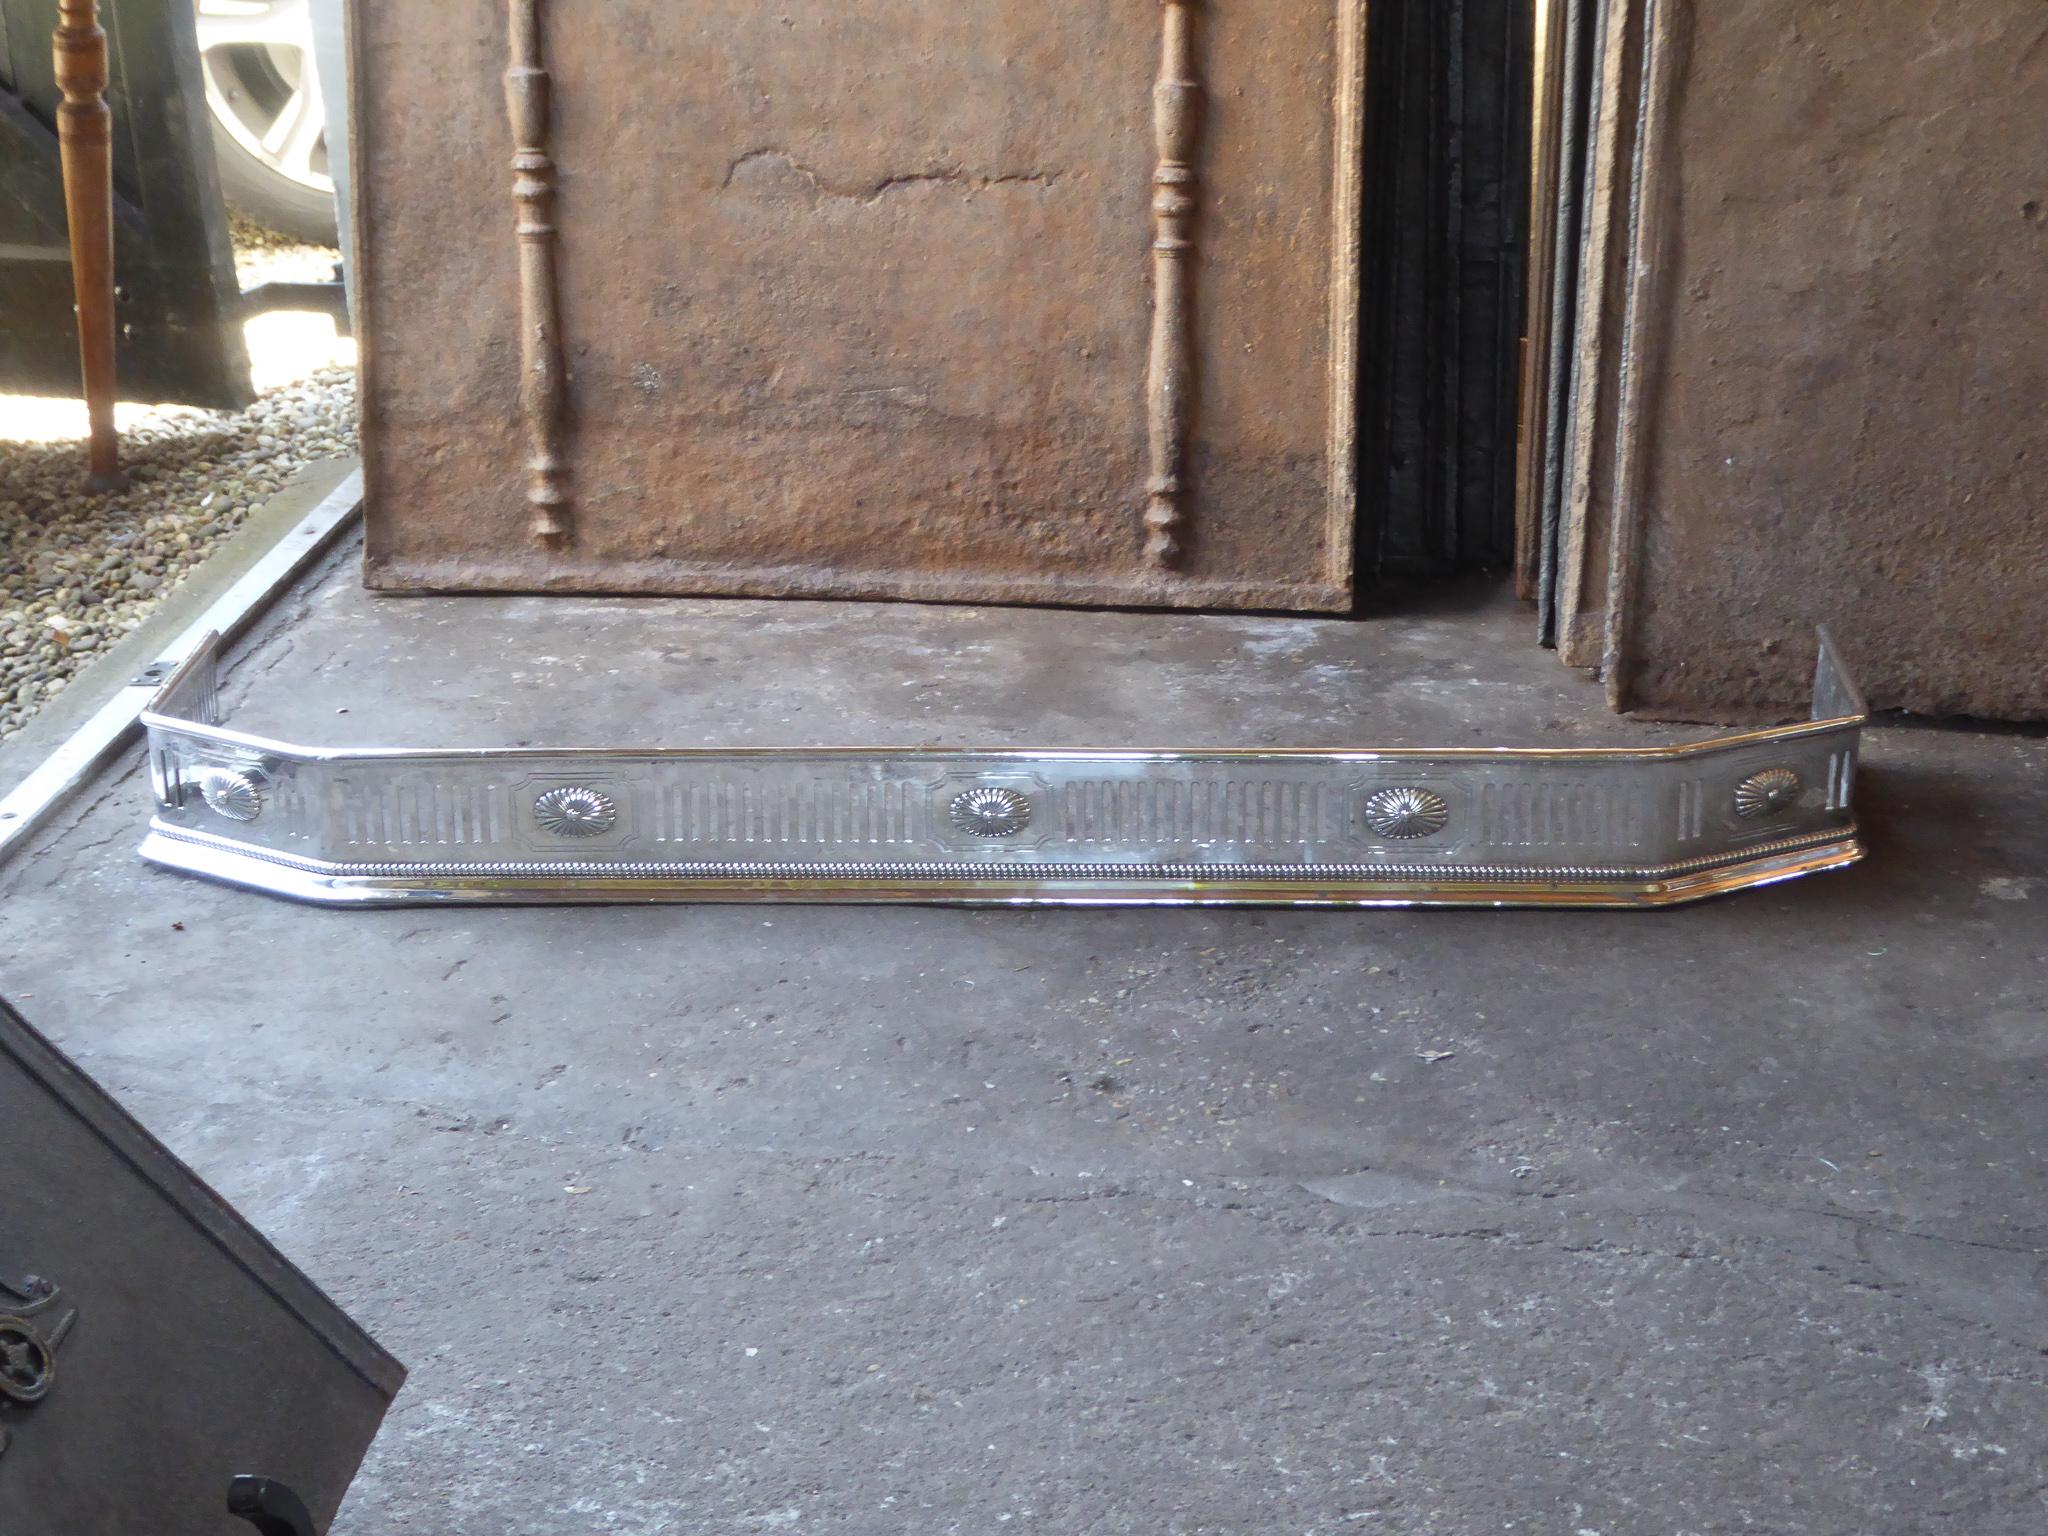 19th century English fire fender made of chrome. Georgian period. The condition is good.

